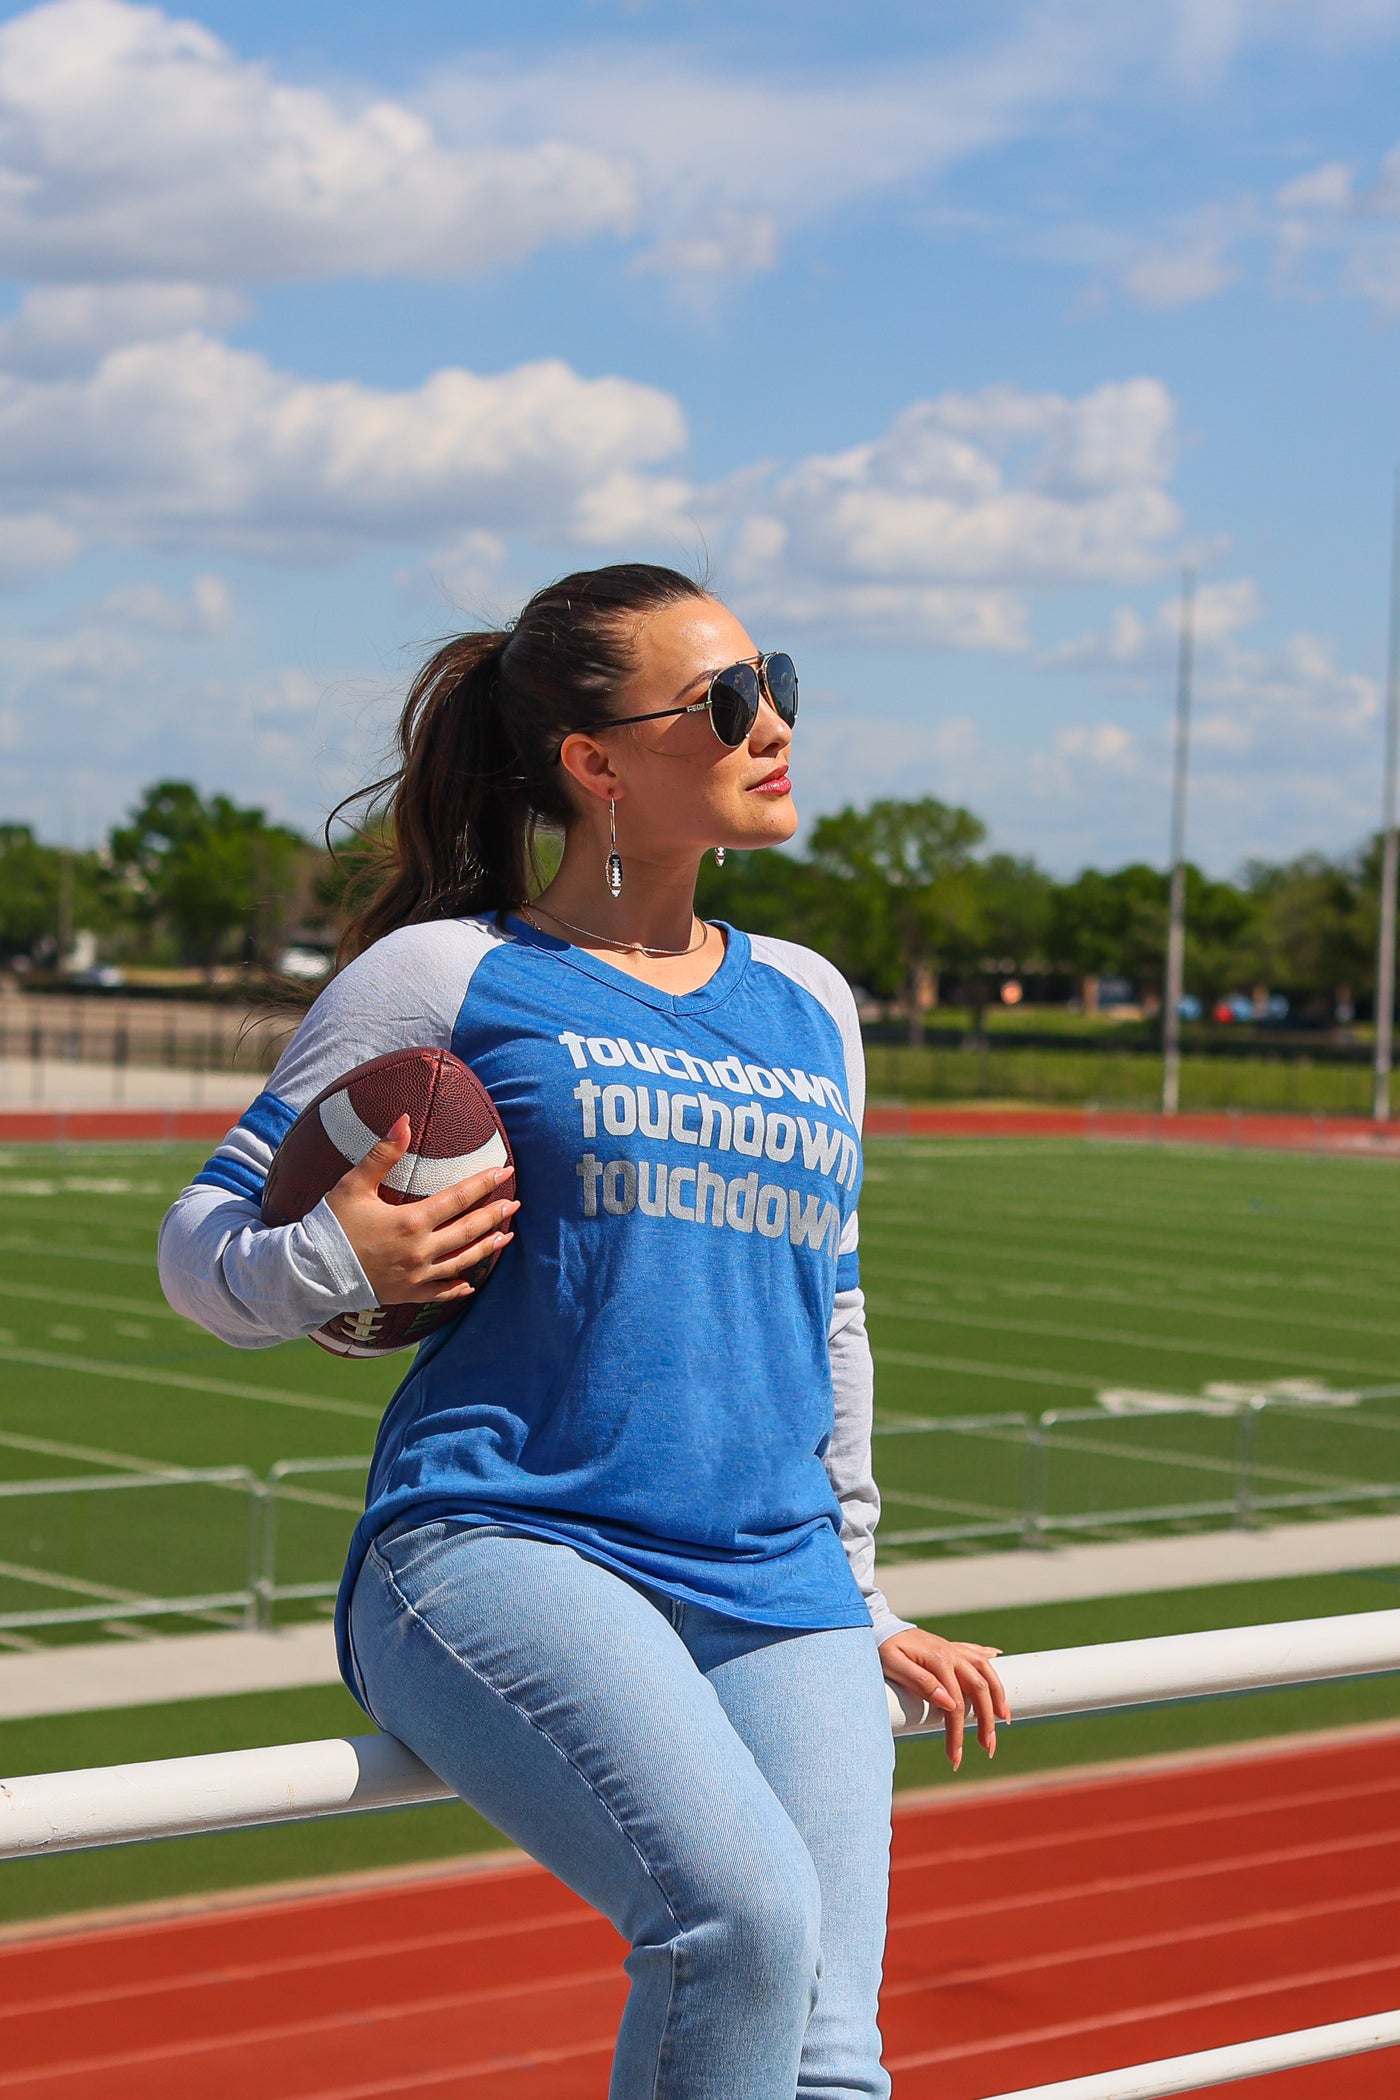 Touchdown Touchdown Touchdown on Royal Blue Longsleeve Tee with Grey Sleeves & Varsity Stripe